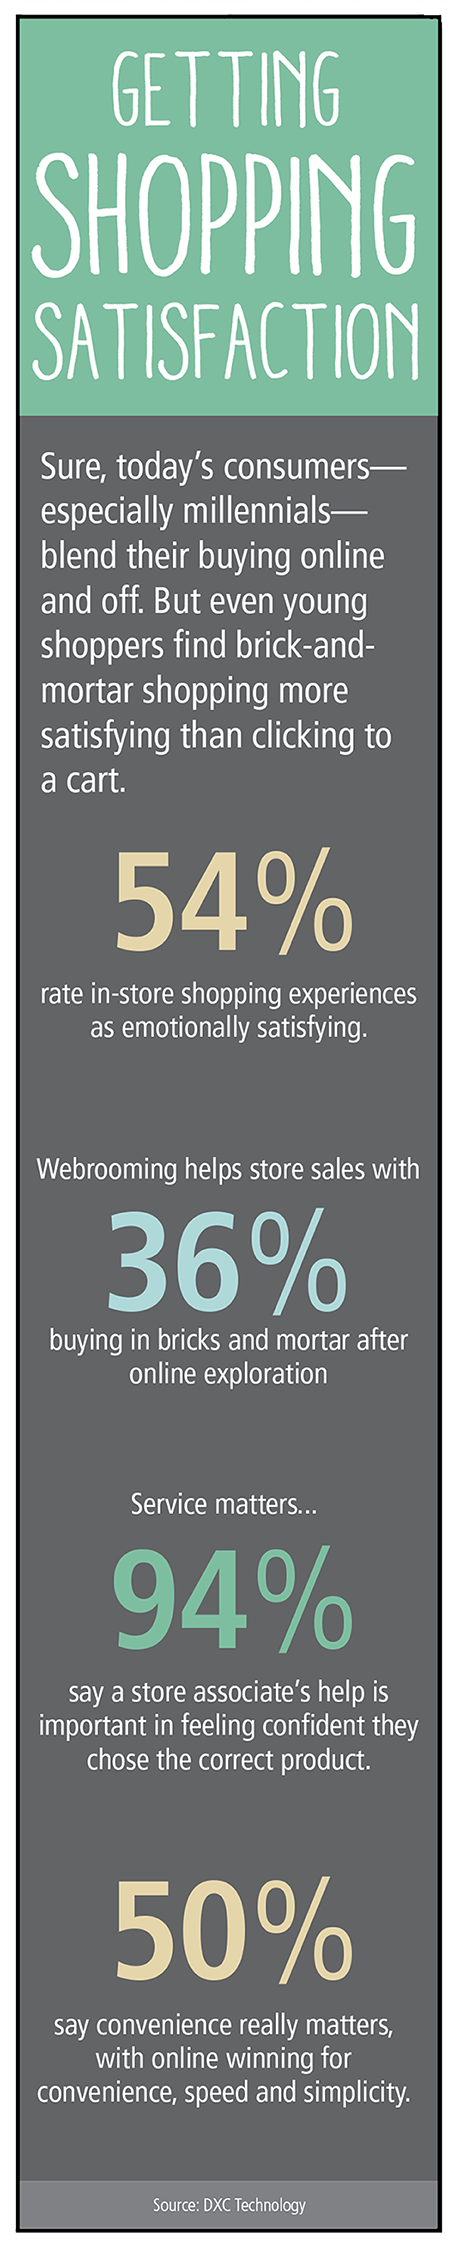 reasons store shopping is more satisfying than online options